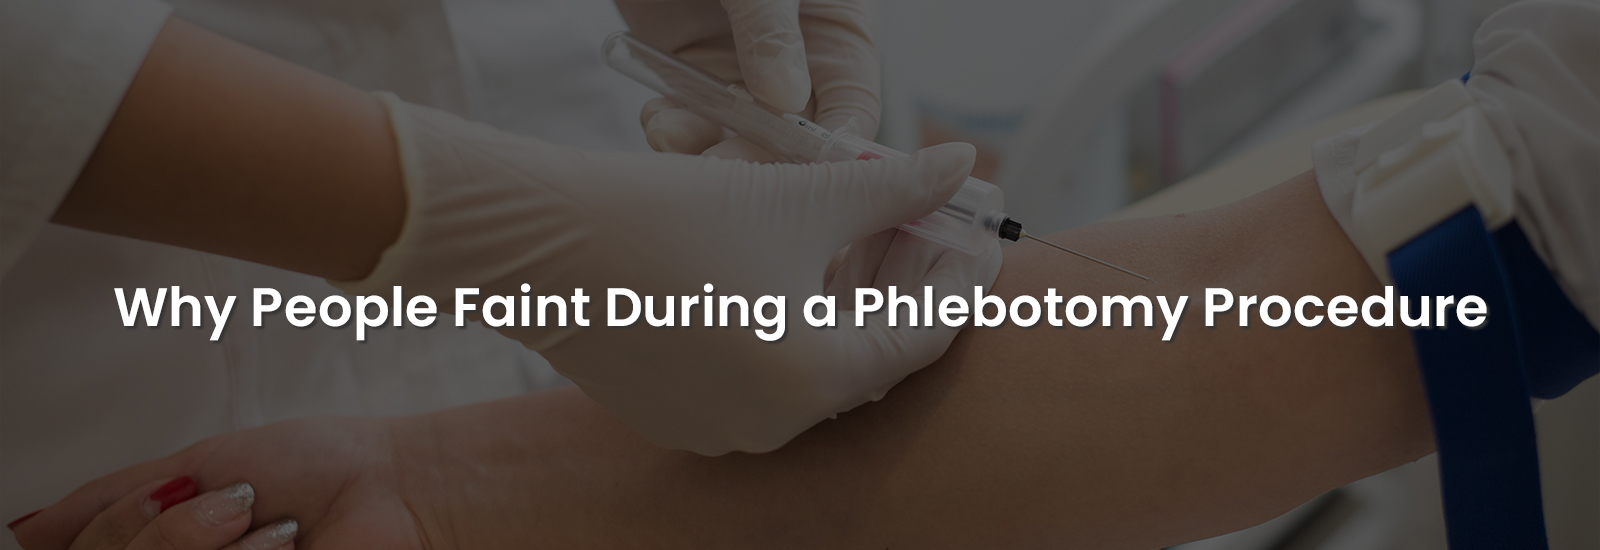 Why People Faint During a Phlebotomy Procedure | Banner Image